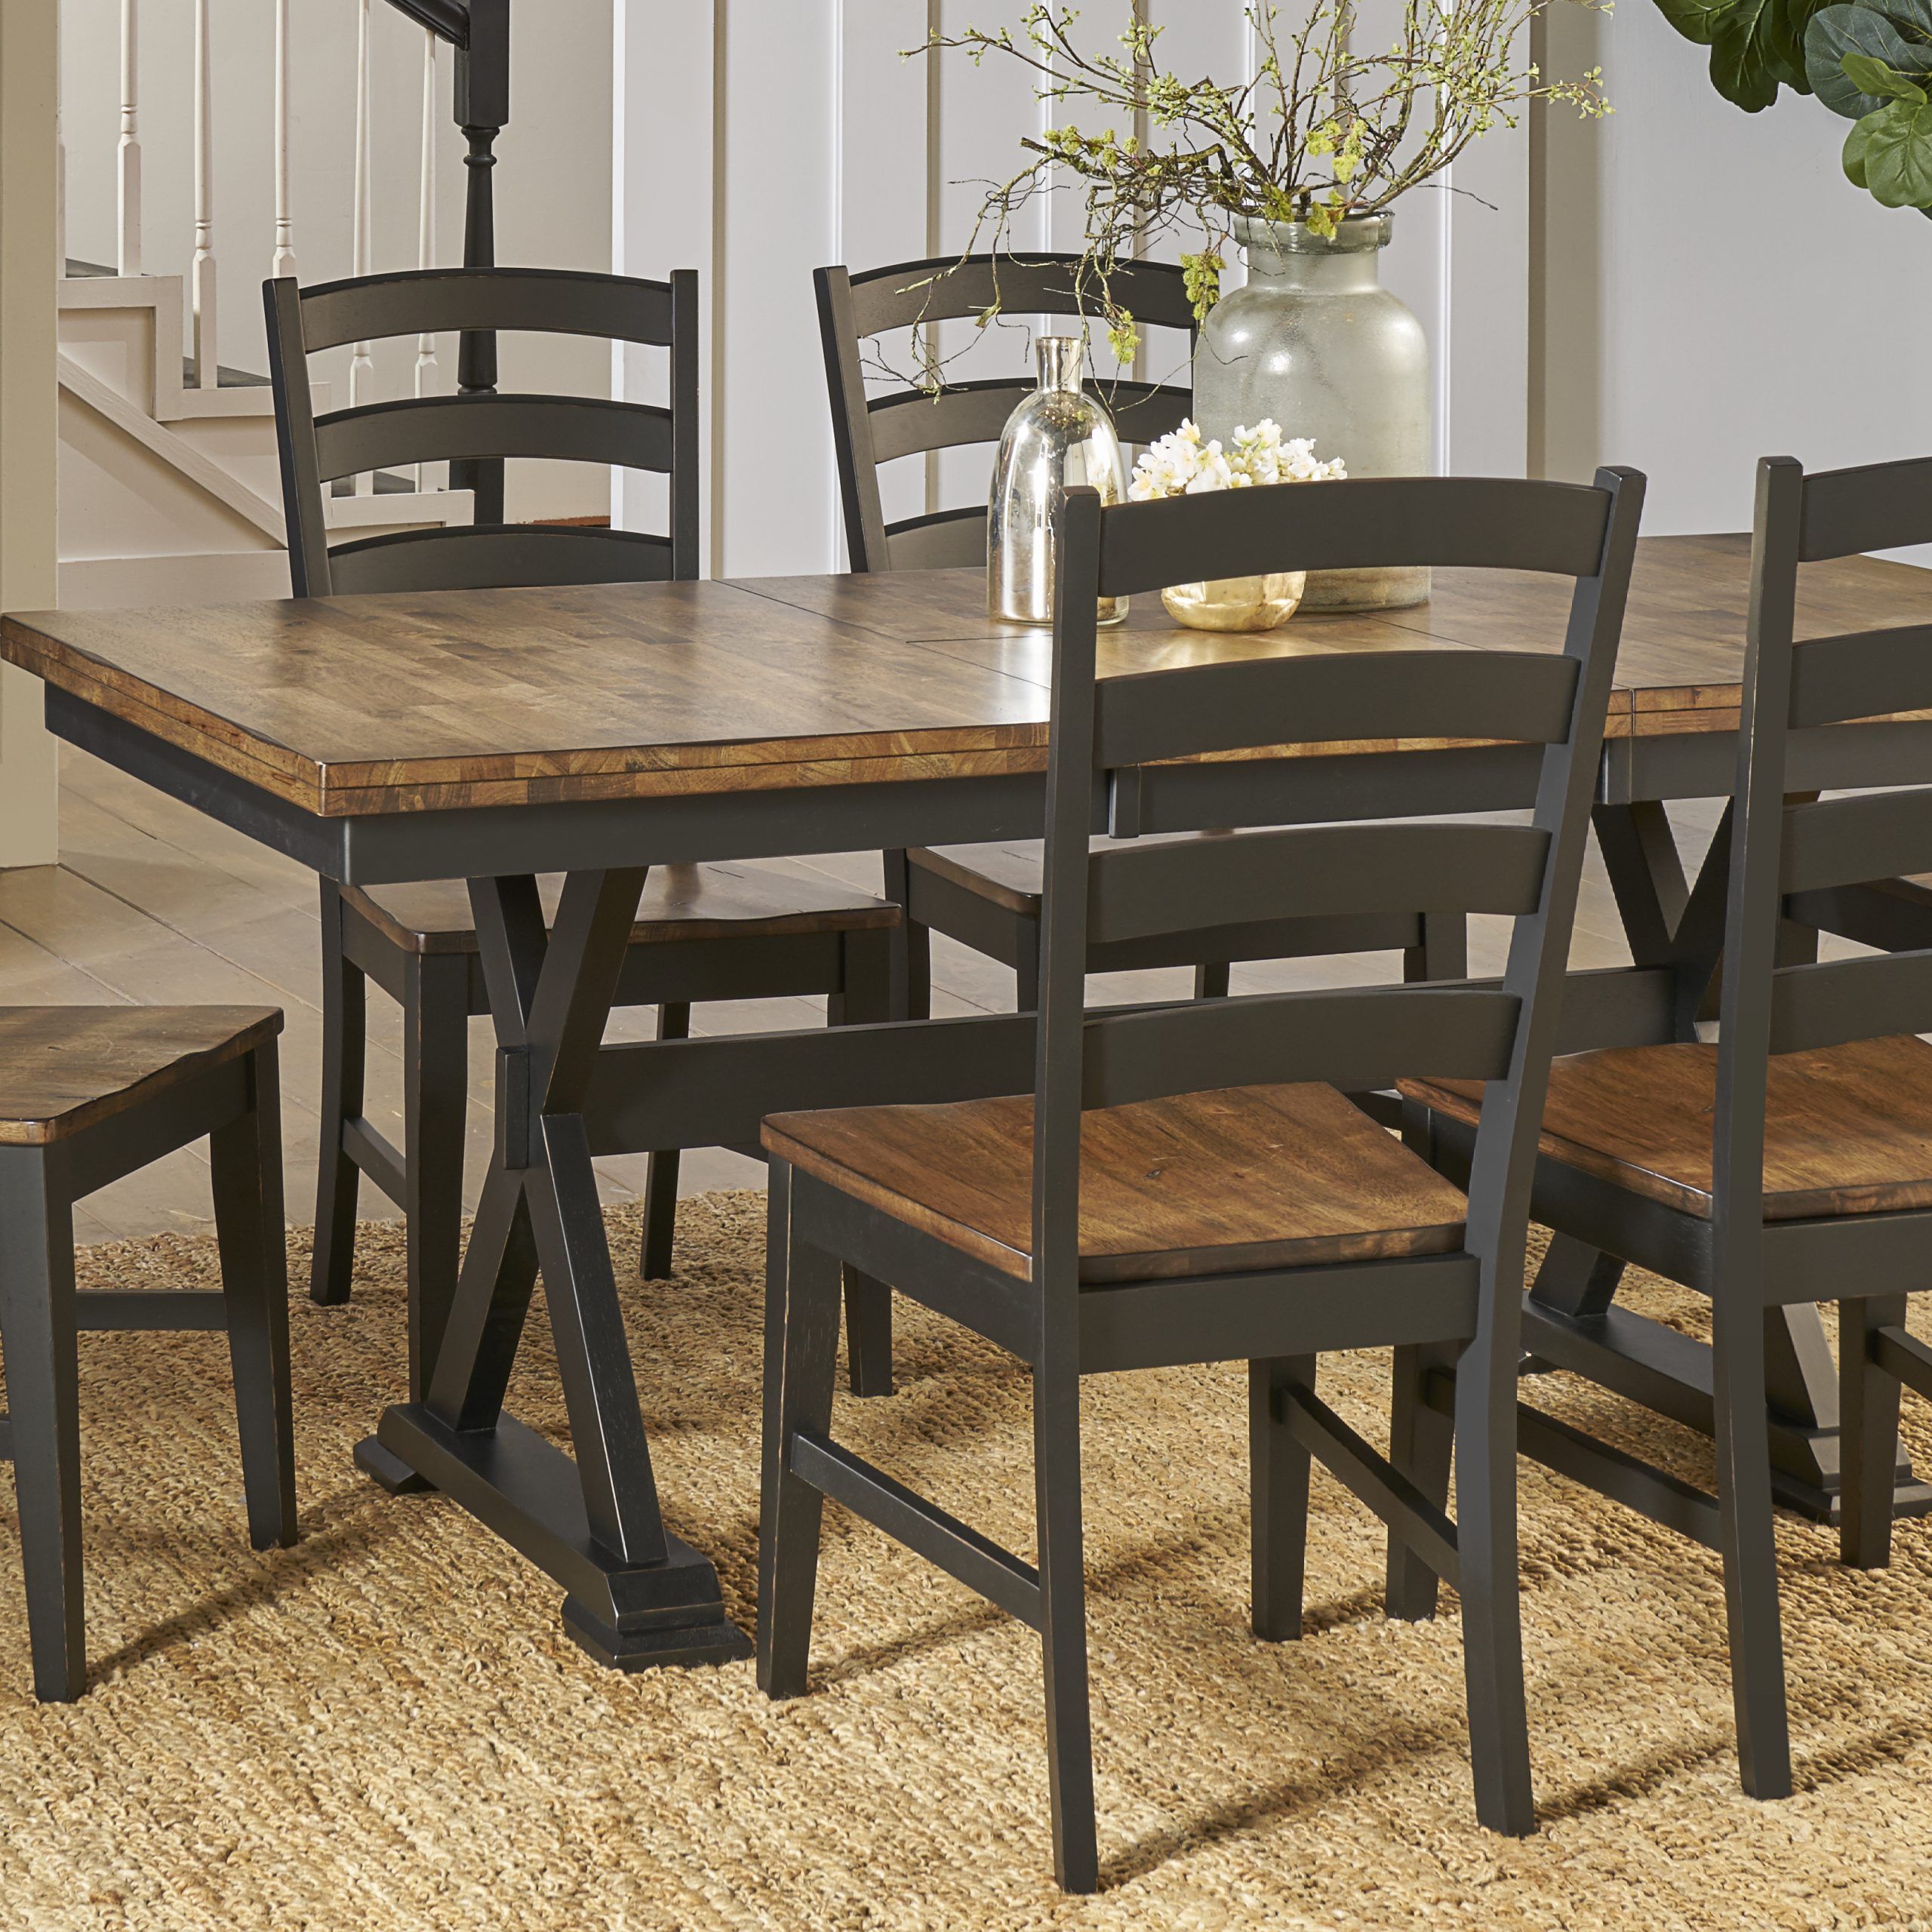 Annie Oakley's Wood Furniture Regarding 2020 Babbie Butterfly Leaf Pine Solid Wood Trestle Dining Tables (View 1 of 20)